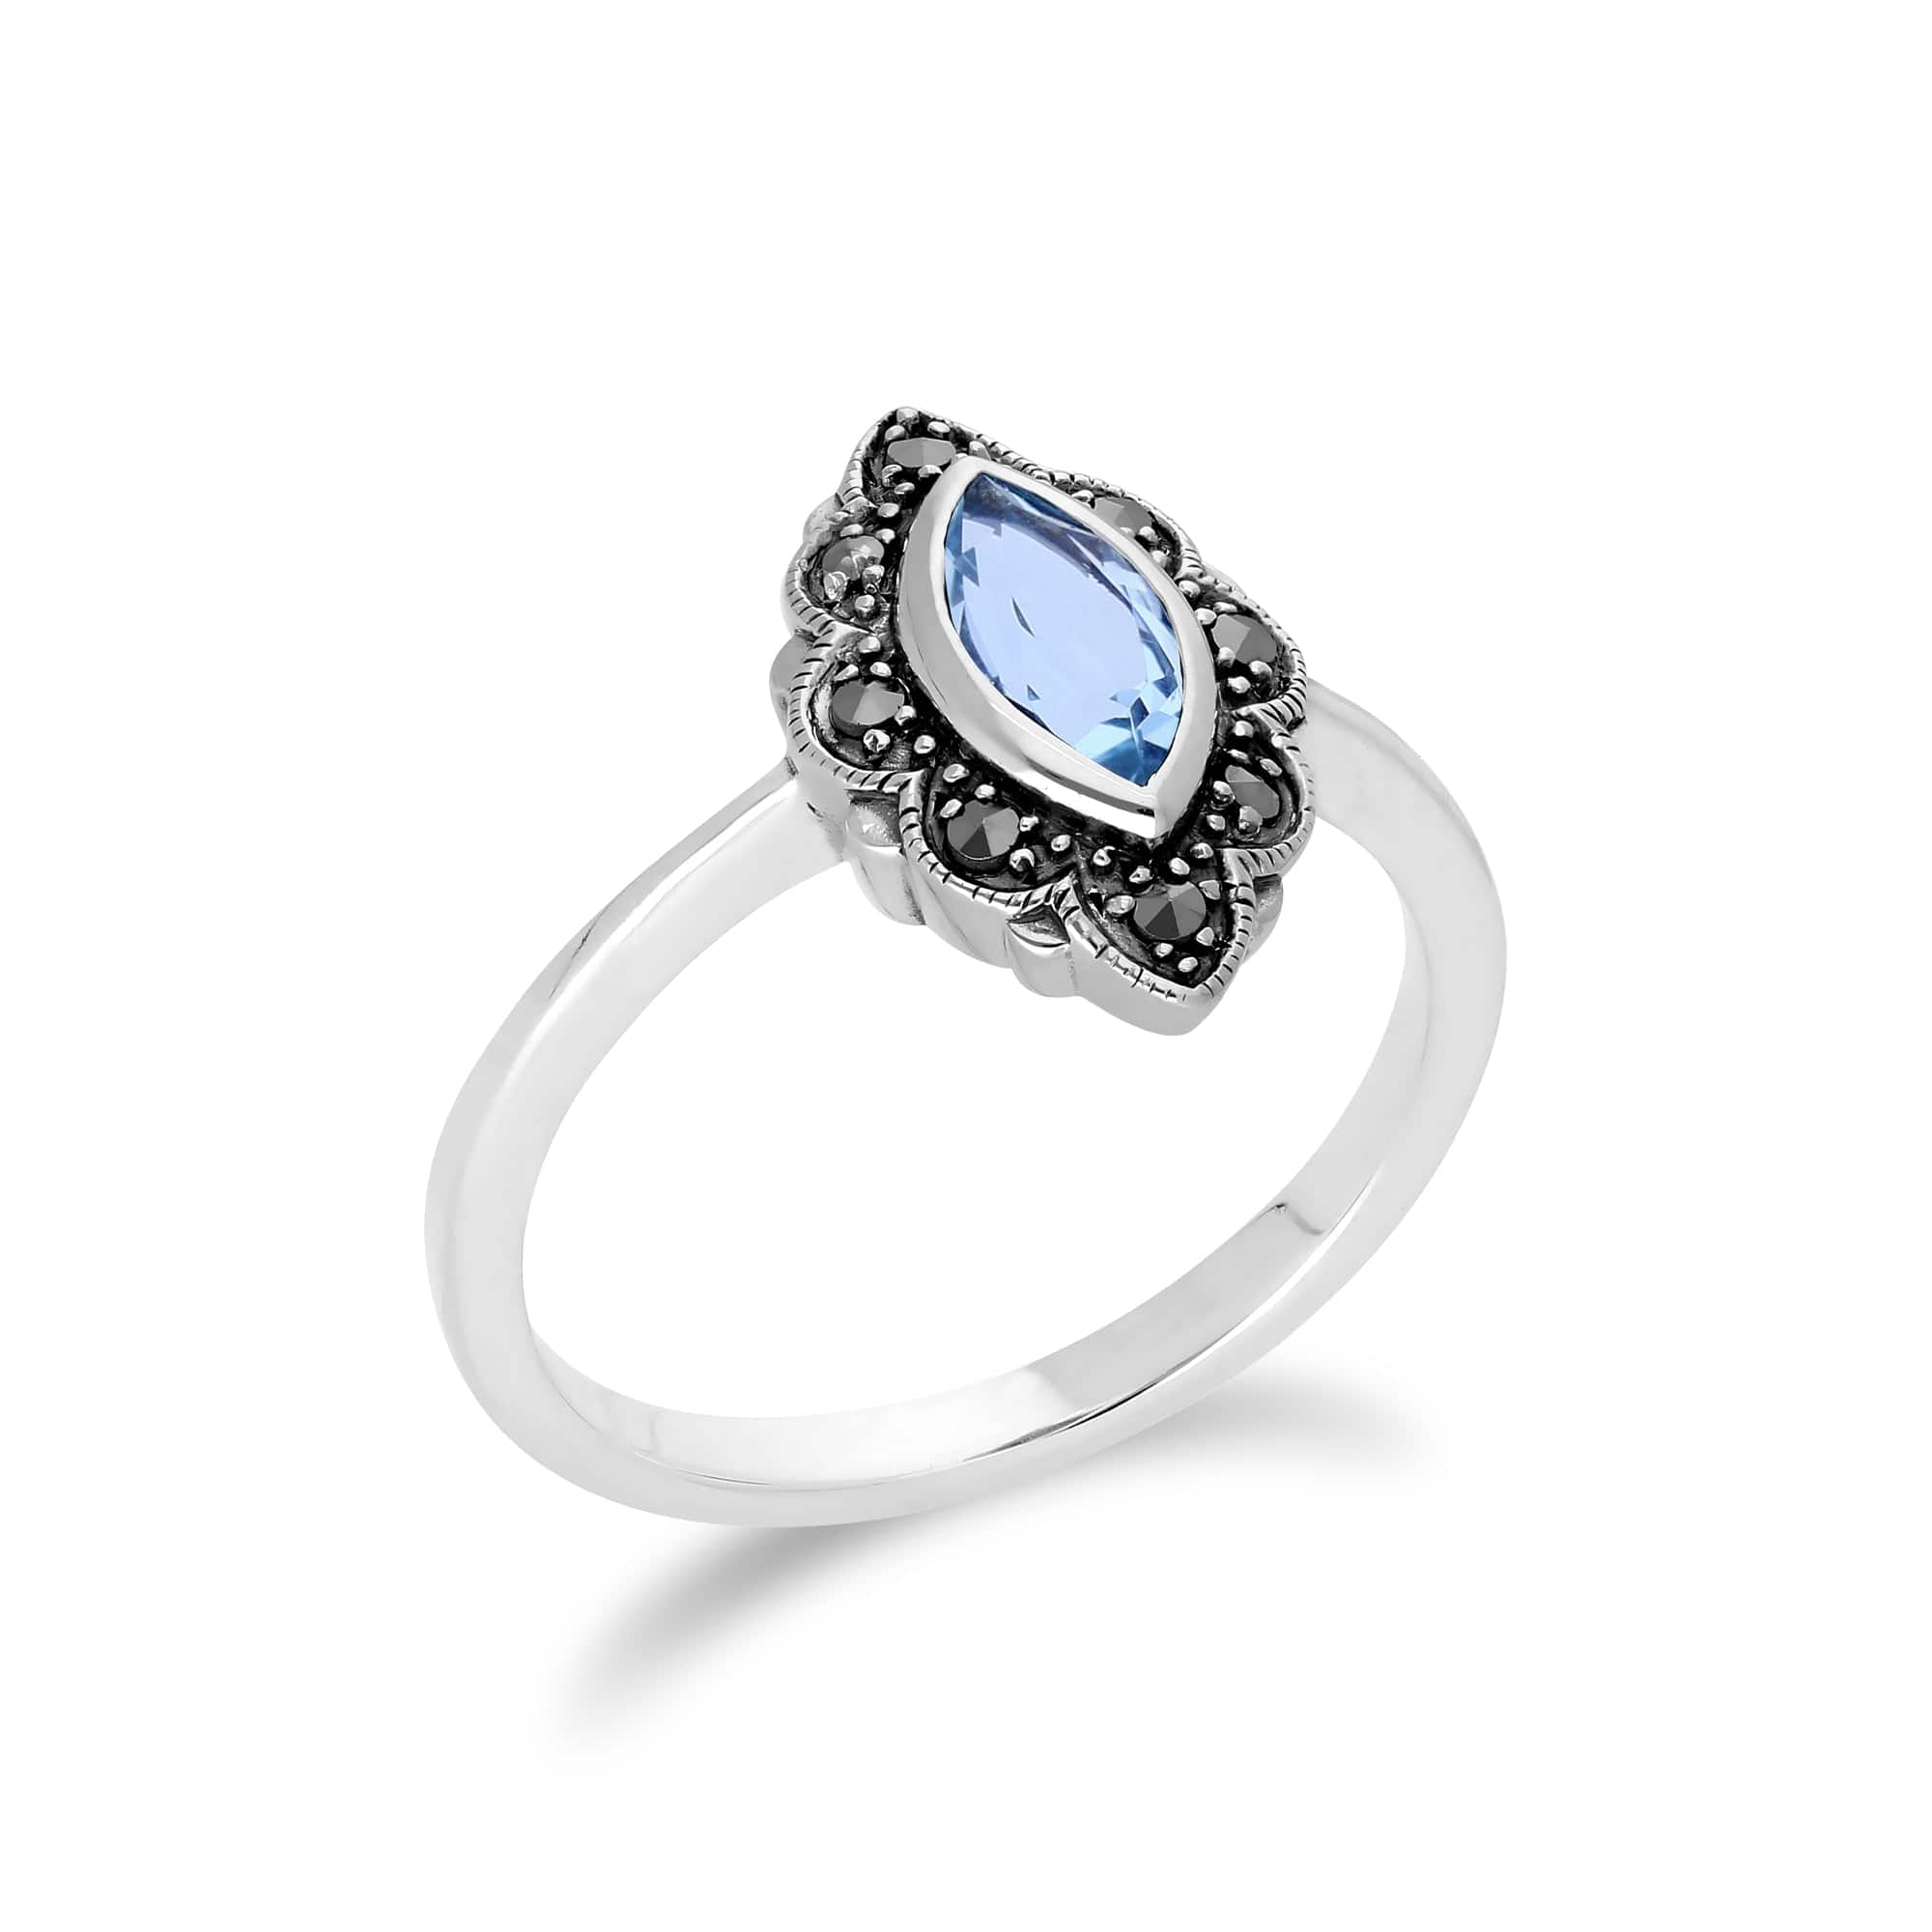 214R597202925 Art Nouveau Marquise Blue Topaz & Marcasite Leaf Ring in 925 Sterling Silver 2